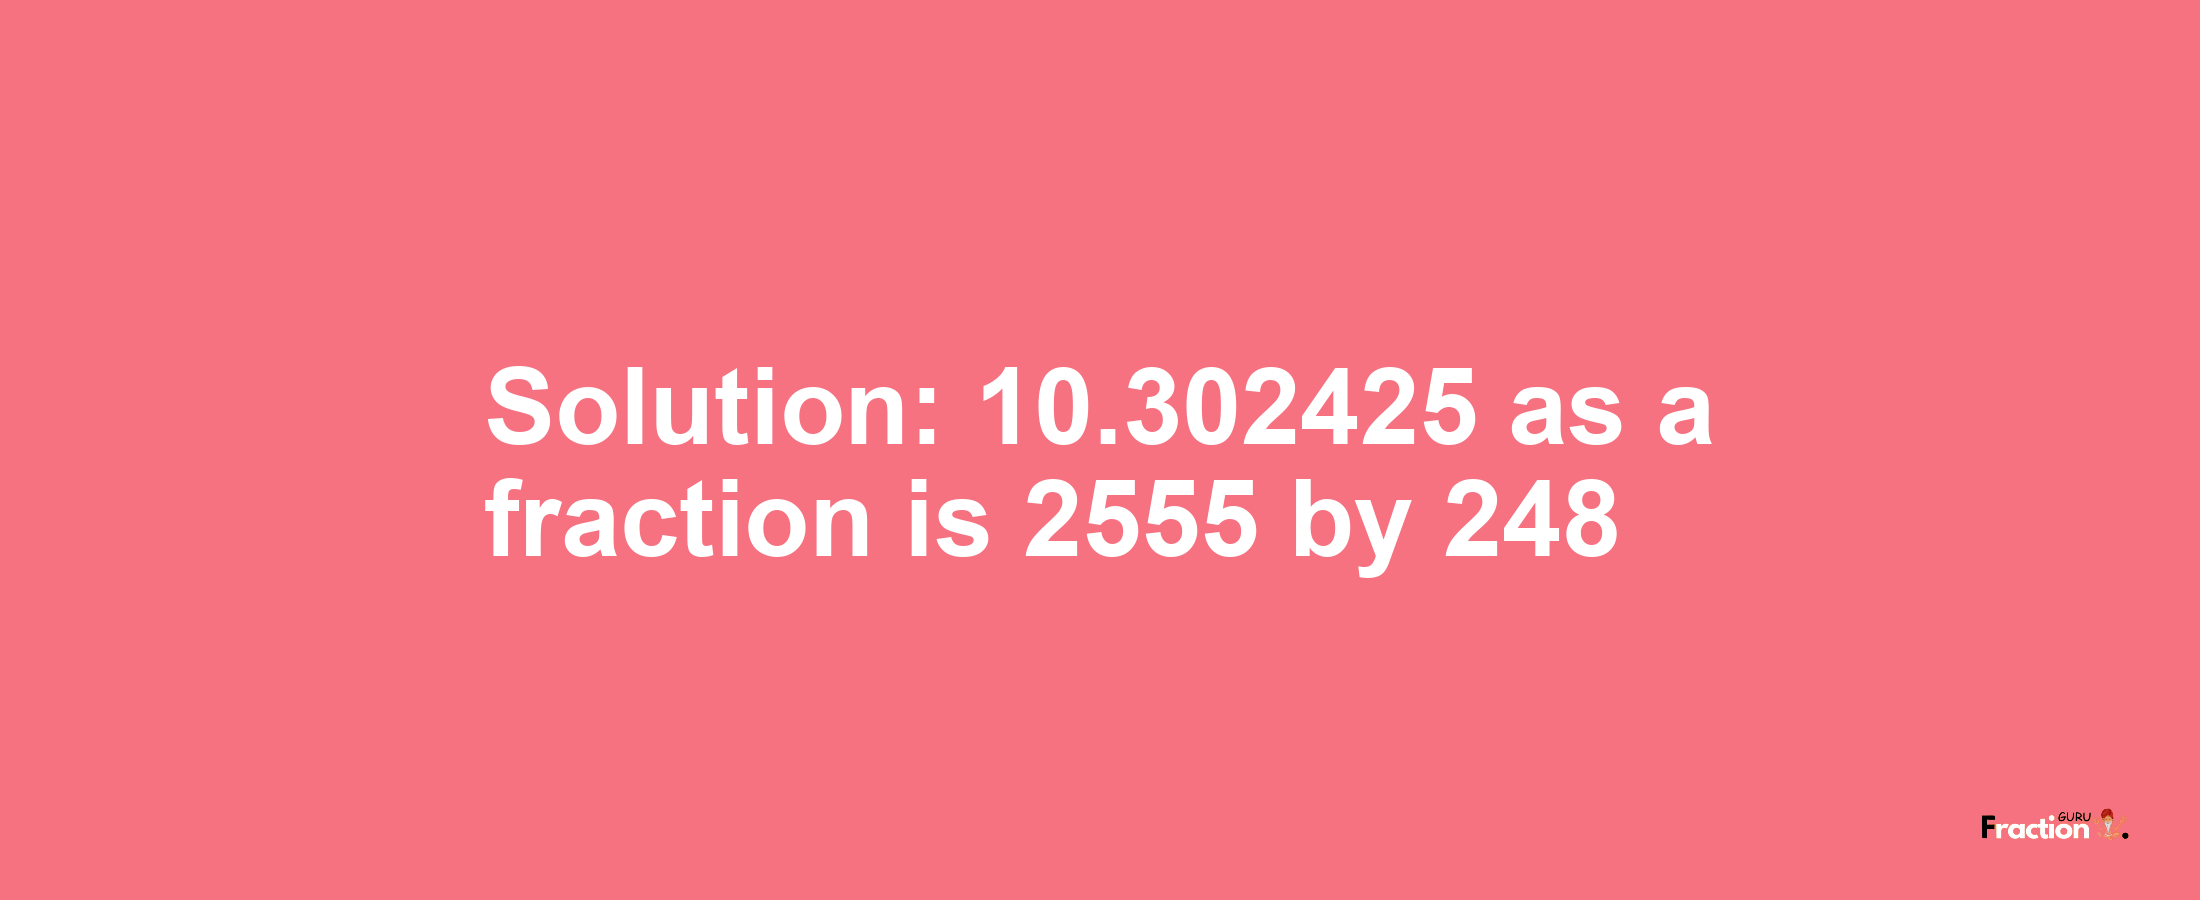 Solution:10.302425 as a fraction is 2555/248